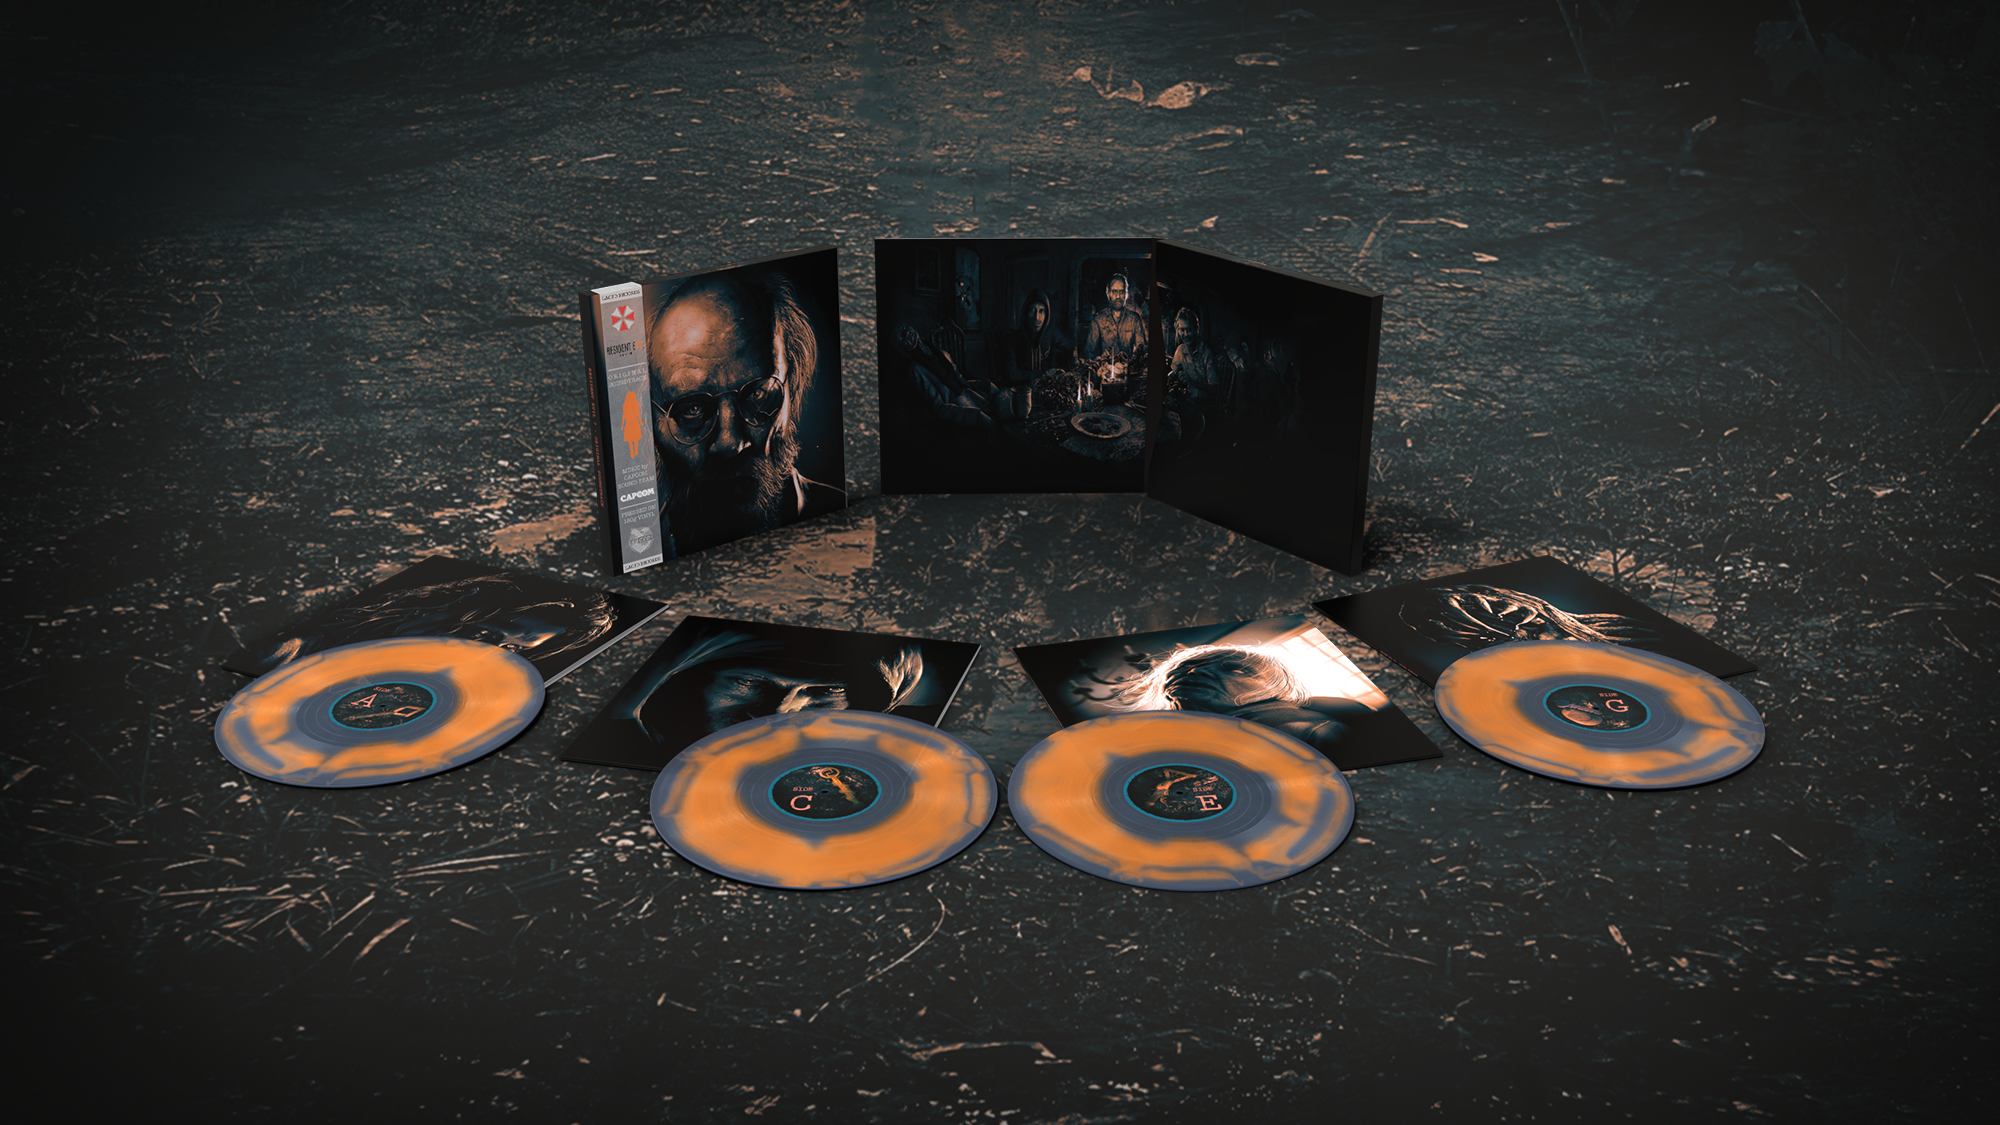 The Resident Evil 7 vinyl Limited Edition